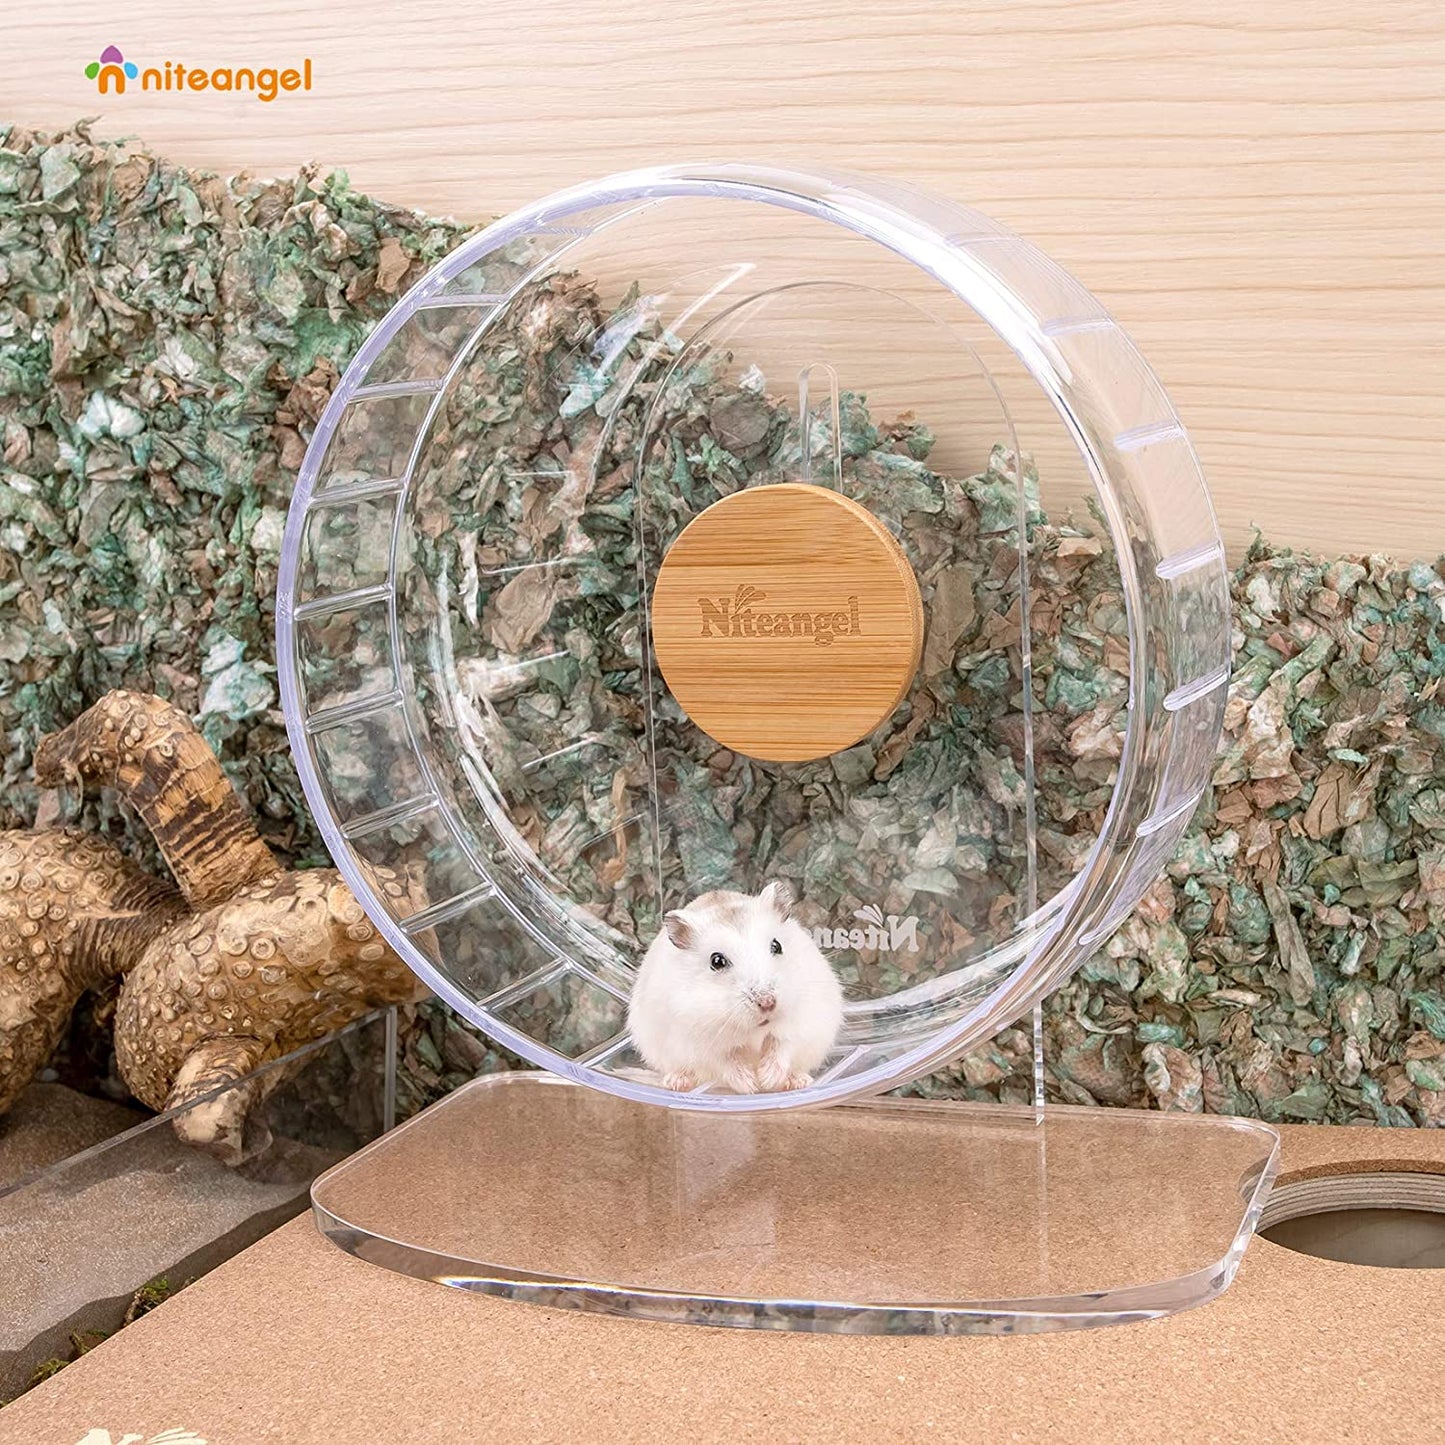 Super-Silent Hamster Exercise Wheels: - Quiet Spinner Hamster Running Wheels with Adjustable Stand for Hamsters Gerbils Mice or Other Small Animals (S, Transparent)